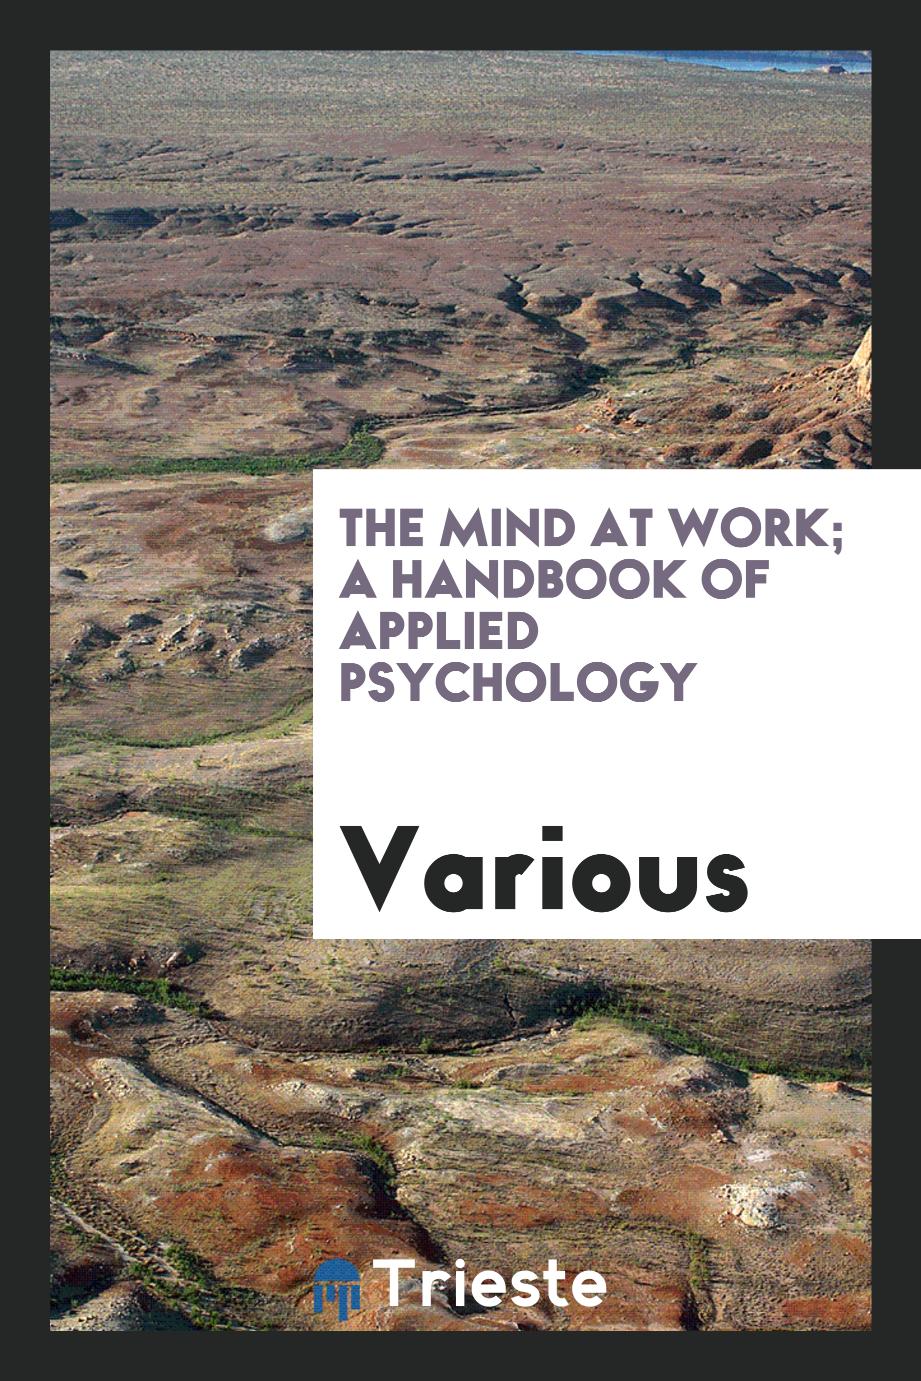 The mind at work; a handbook of applied psychology